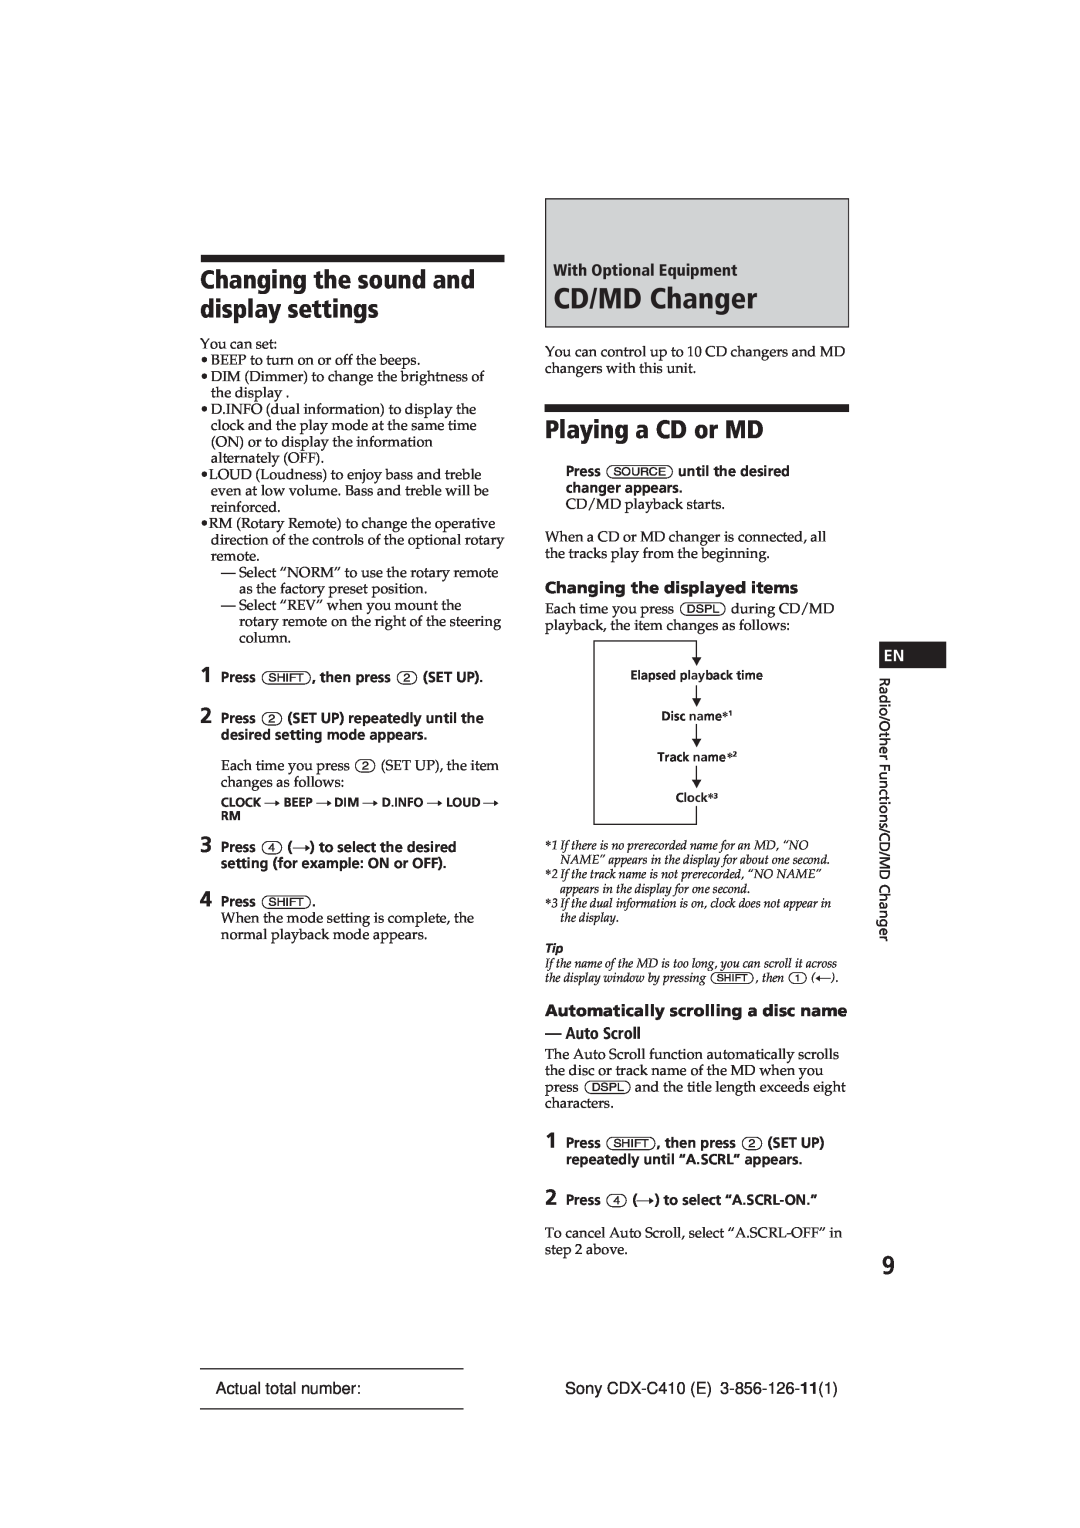 Sony CDX-C410 manual CD/MD Changer, Changing the sound and display settings, Playing a CD or MD, With Optional Equipment 